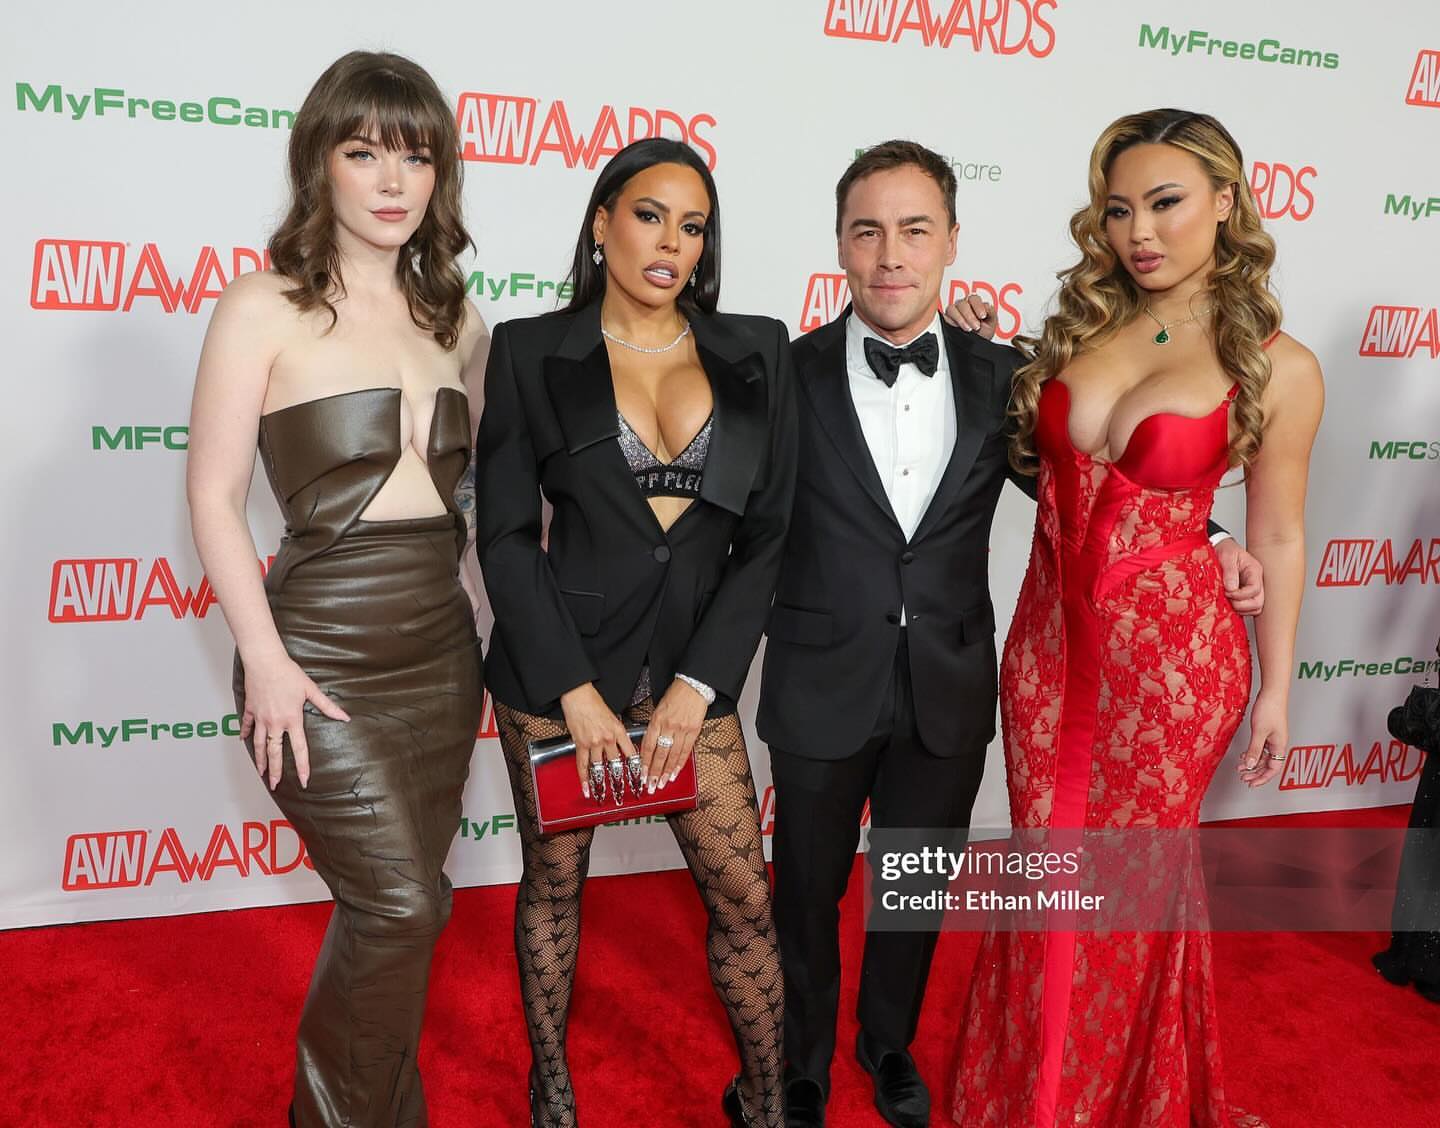 AVN was a DREAM come true! Thank you for having me & giving me the best costars ever @kazumisworld @luna5star 
I’ve fantasized about this since i first started in the industry in 2014 and never ever thought i would actually get to do it! Hosting AVN was exactly what I had hoped it would be, incredible in every way! 
Thank you to my fans for getting me to this level in my career, THANK YOU 💗
also thank you @asanchezfashion for making me the most gorgeous dresses 💗